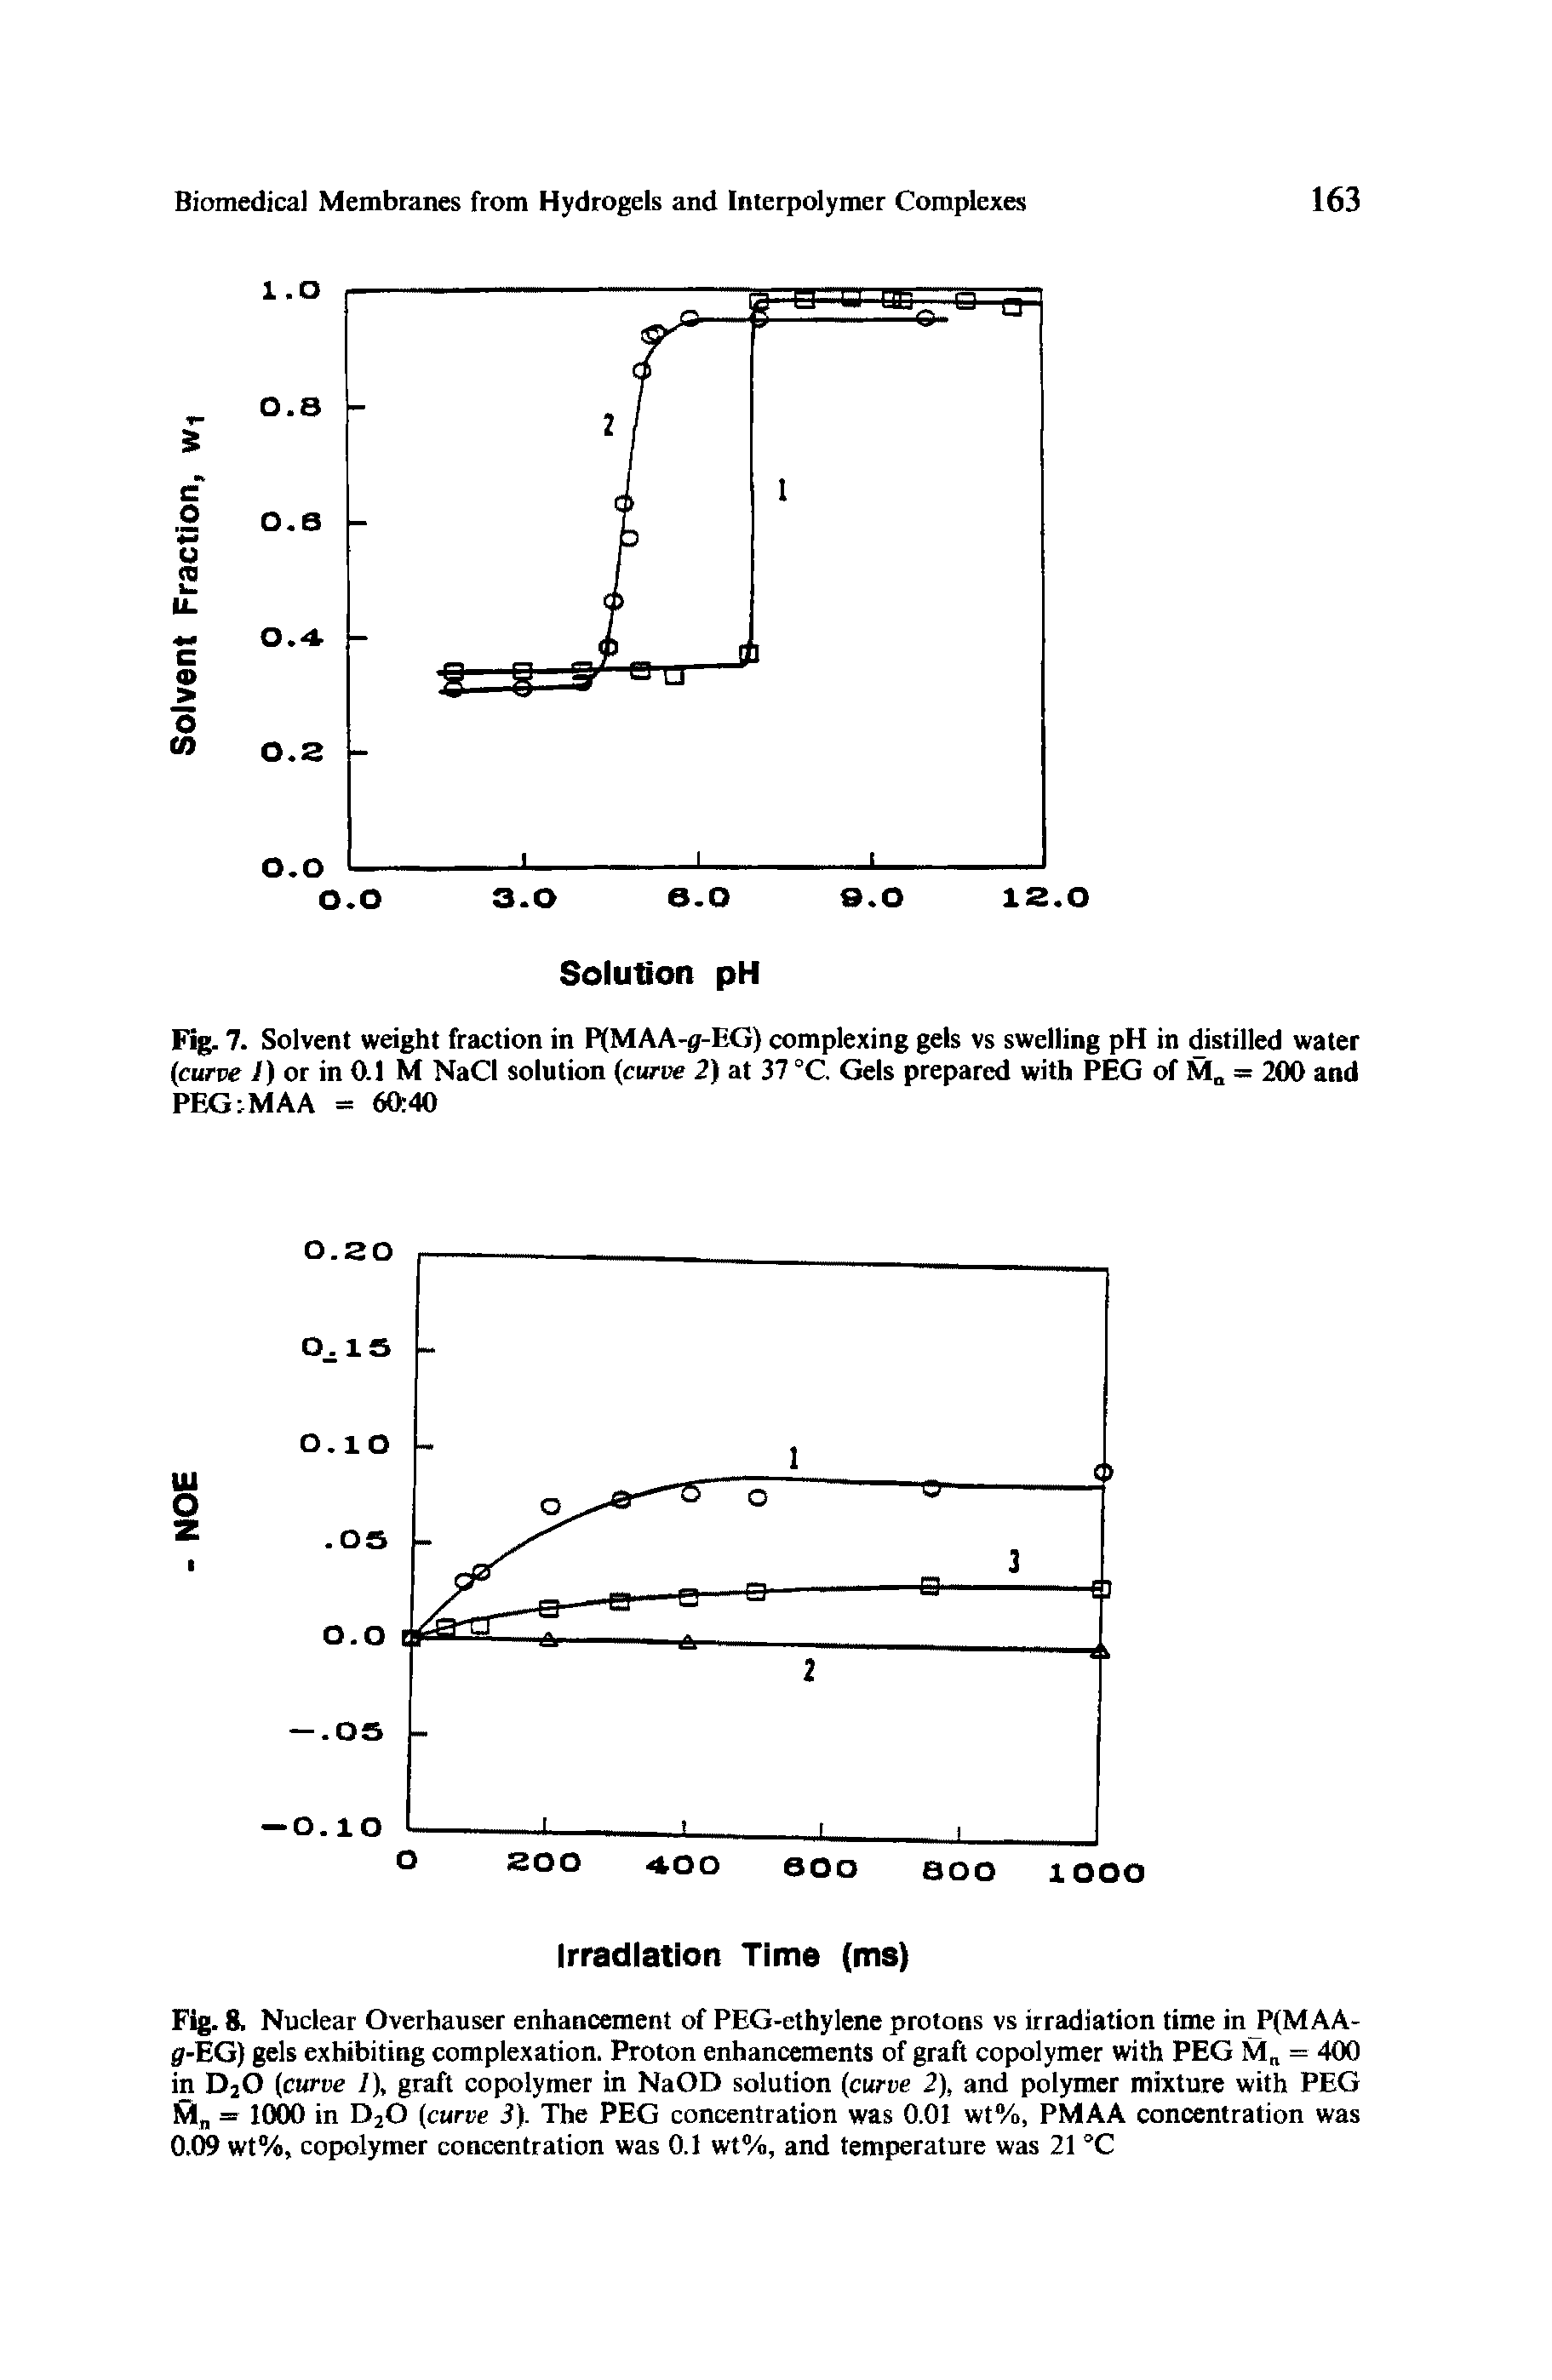 Fig. 8. Nuclear Overhauser enhancement of PEG-ethylene protons vs irradiation time in P(MAA-j -EG) gels exhibiting complexation. Proton enhancements of graft copolymer with PEG M = 400 in D20 (curve 1), graft copolymer in NaOD solution (curve 2), and polymer mixture with PEG M = 1000 in D20 (curve i). The PEG concentration was 0.01 wt%, PMAA concentration was 0.09 wt%, copolymer concentration was 0.1 wt%, and temperature was 21 °C...